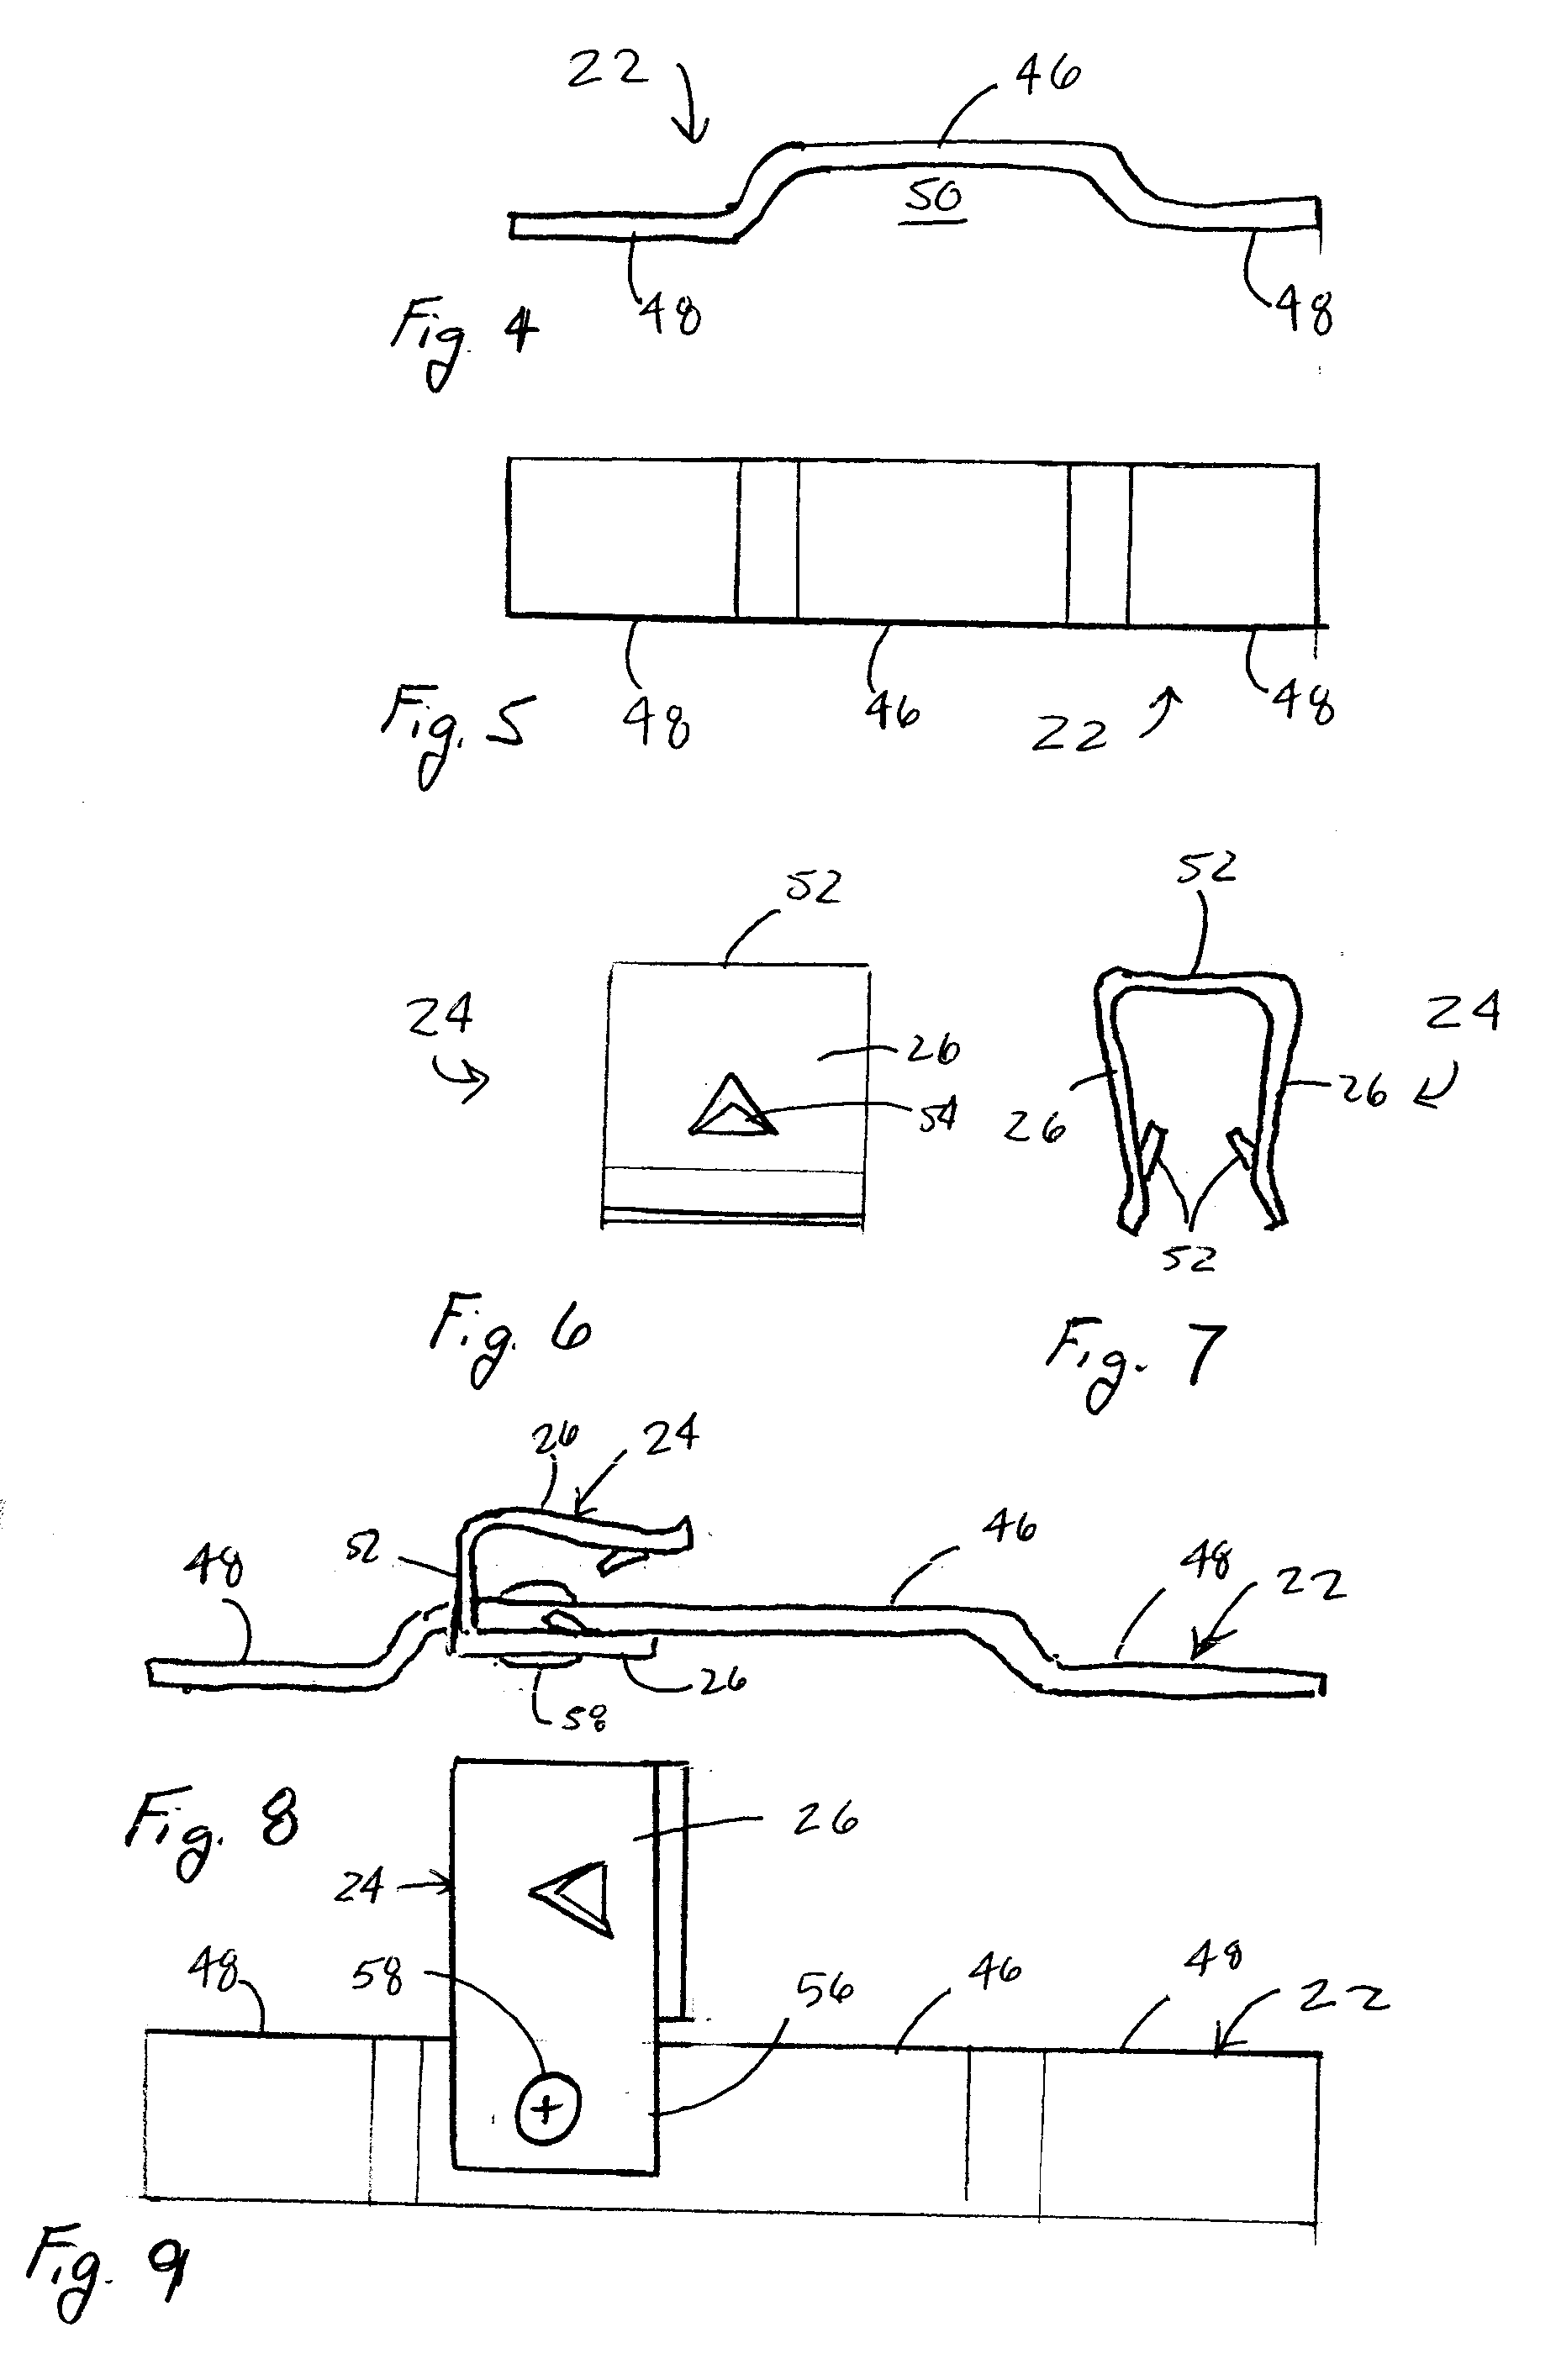 Clip-in window assembly for vehicles